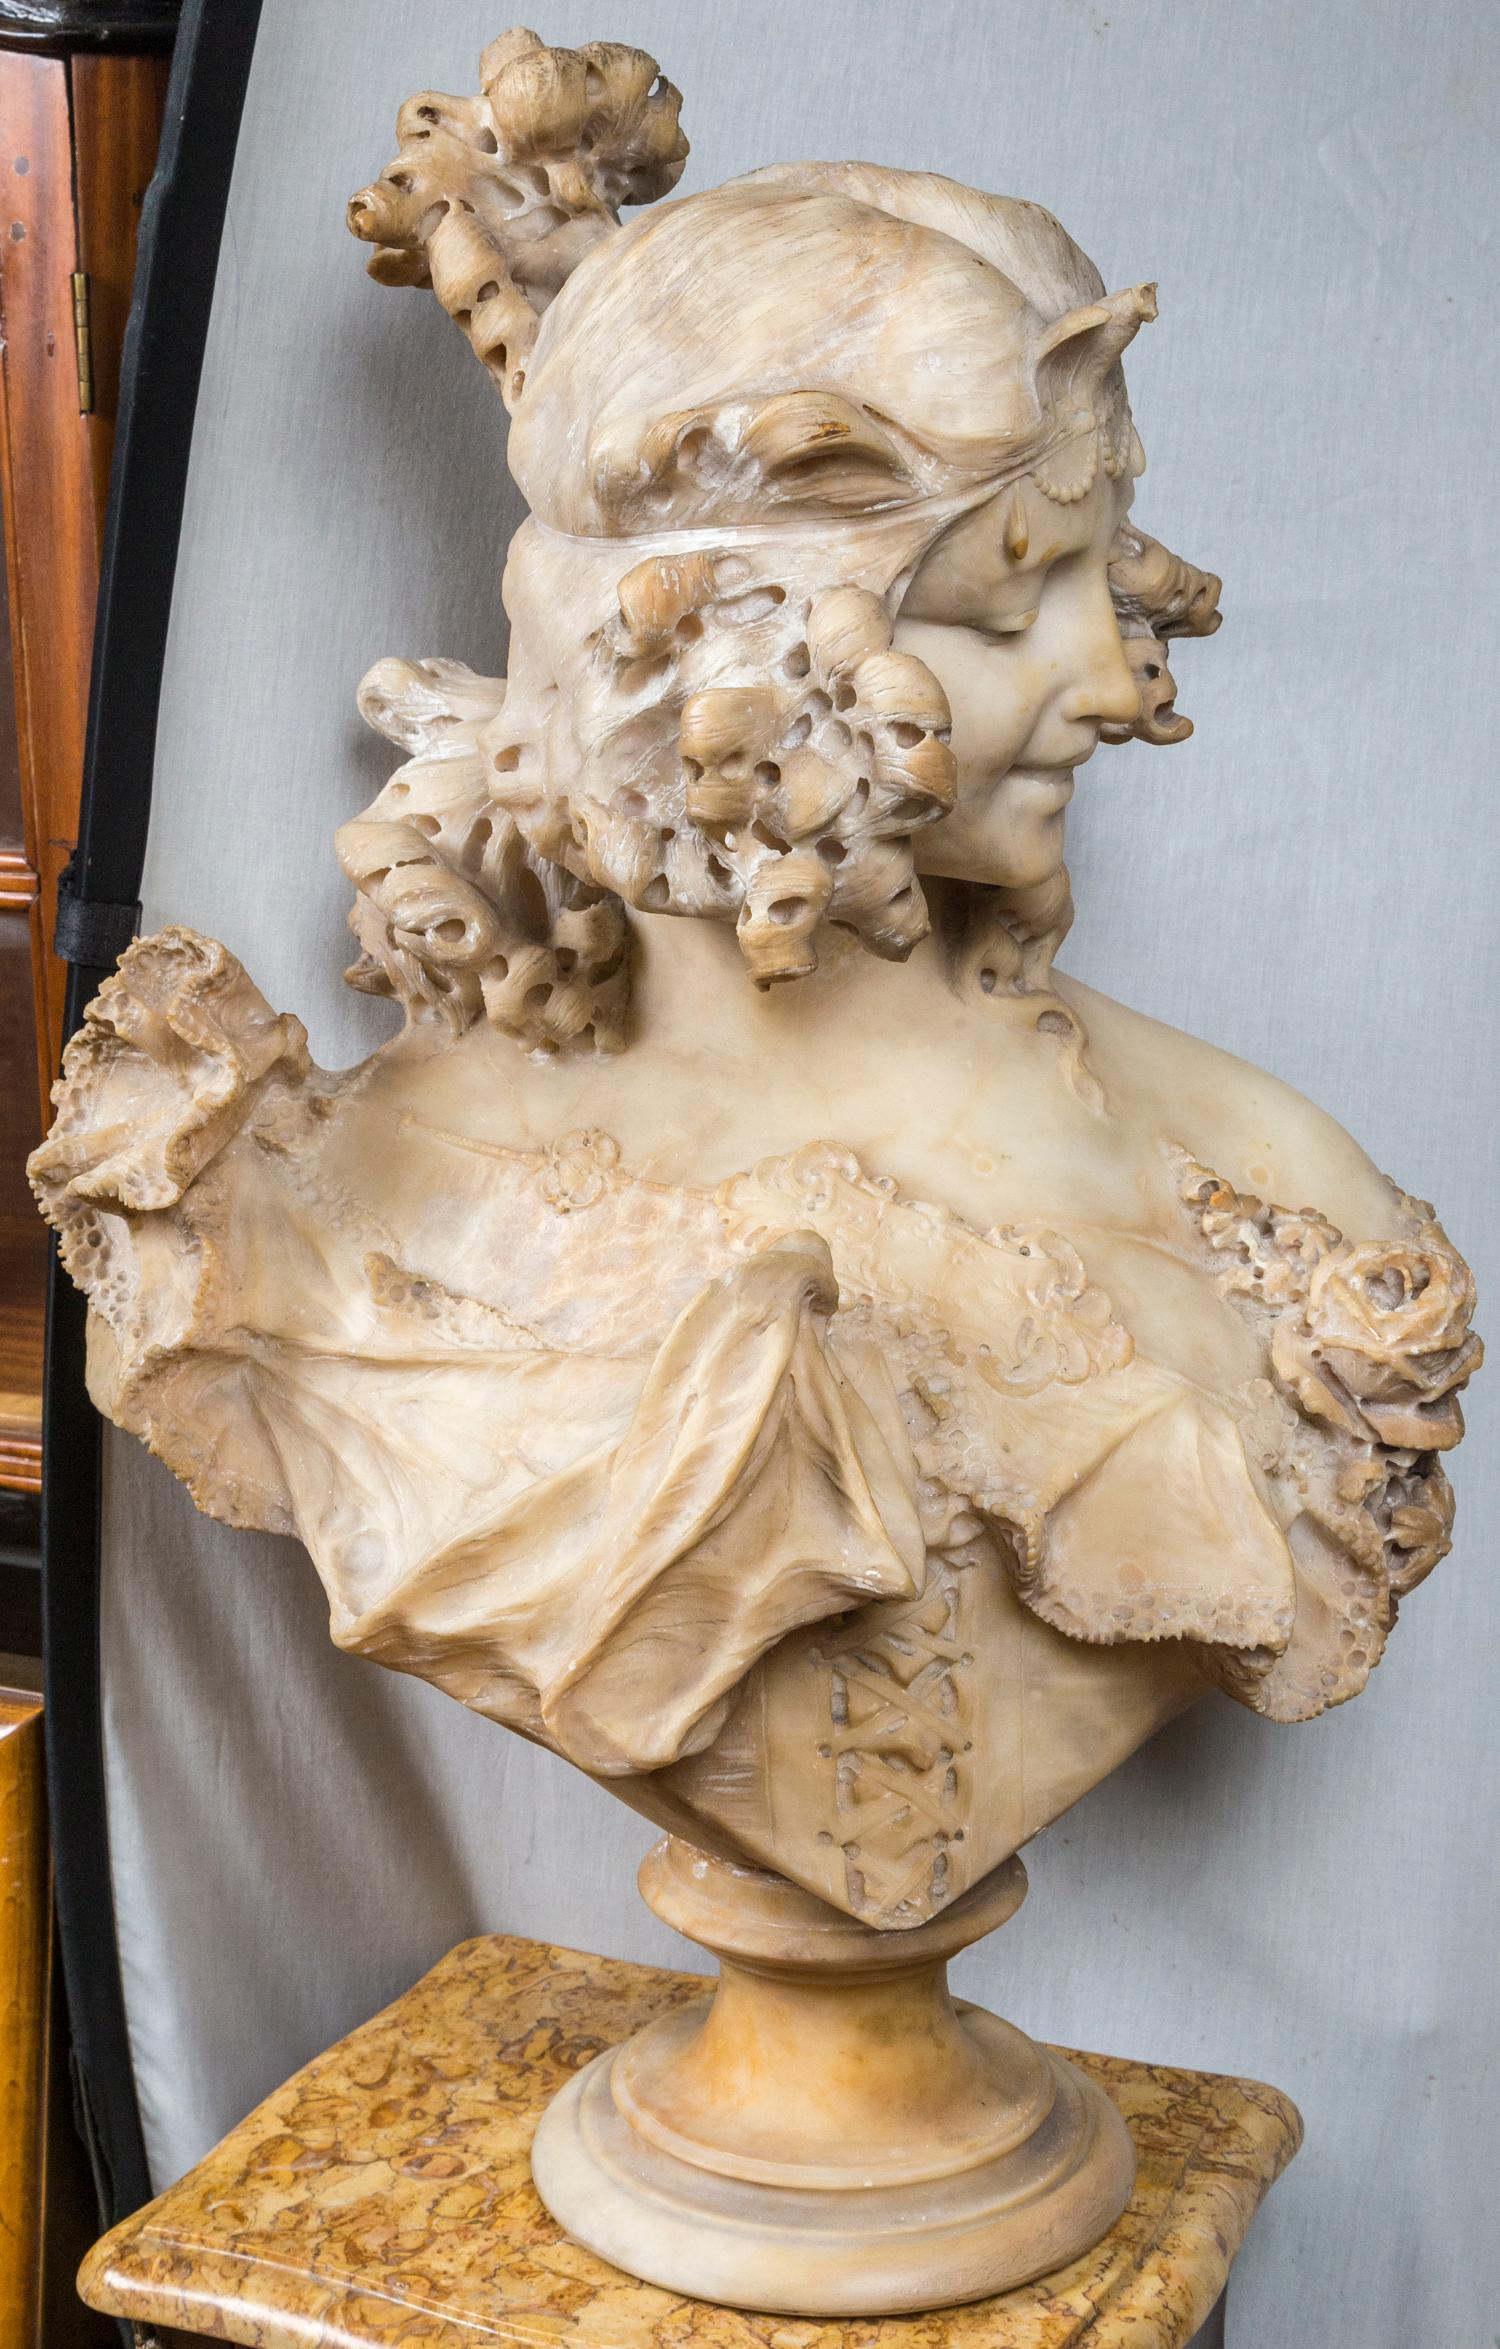 This lady has loose curls of lush hair on the sides and back. A knot of her hair sits atop her head. She wears a lace bordered gown, gathered in the center with floral adornments. The unattached base is 8 inches in diameter.